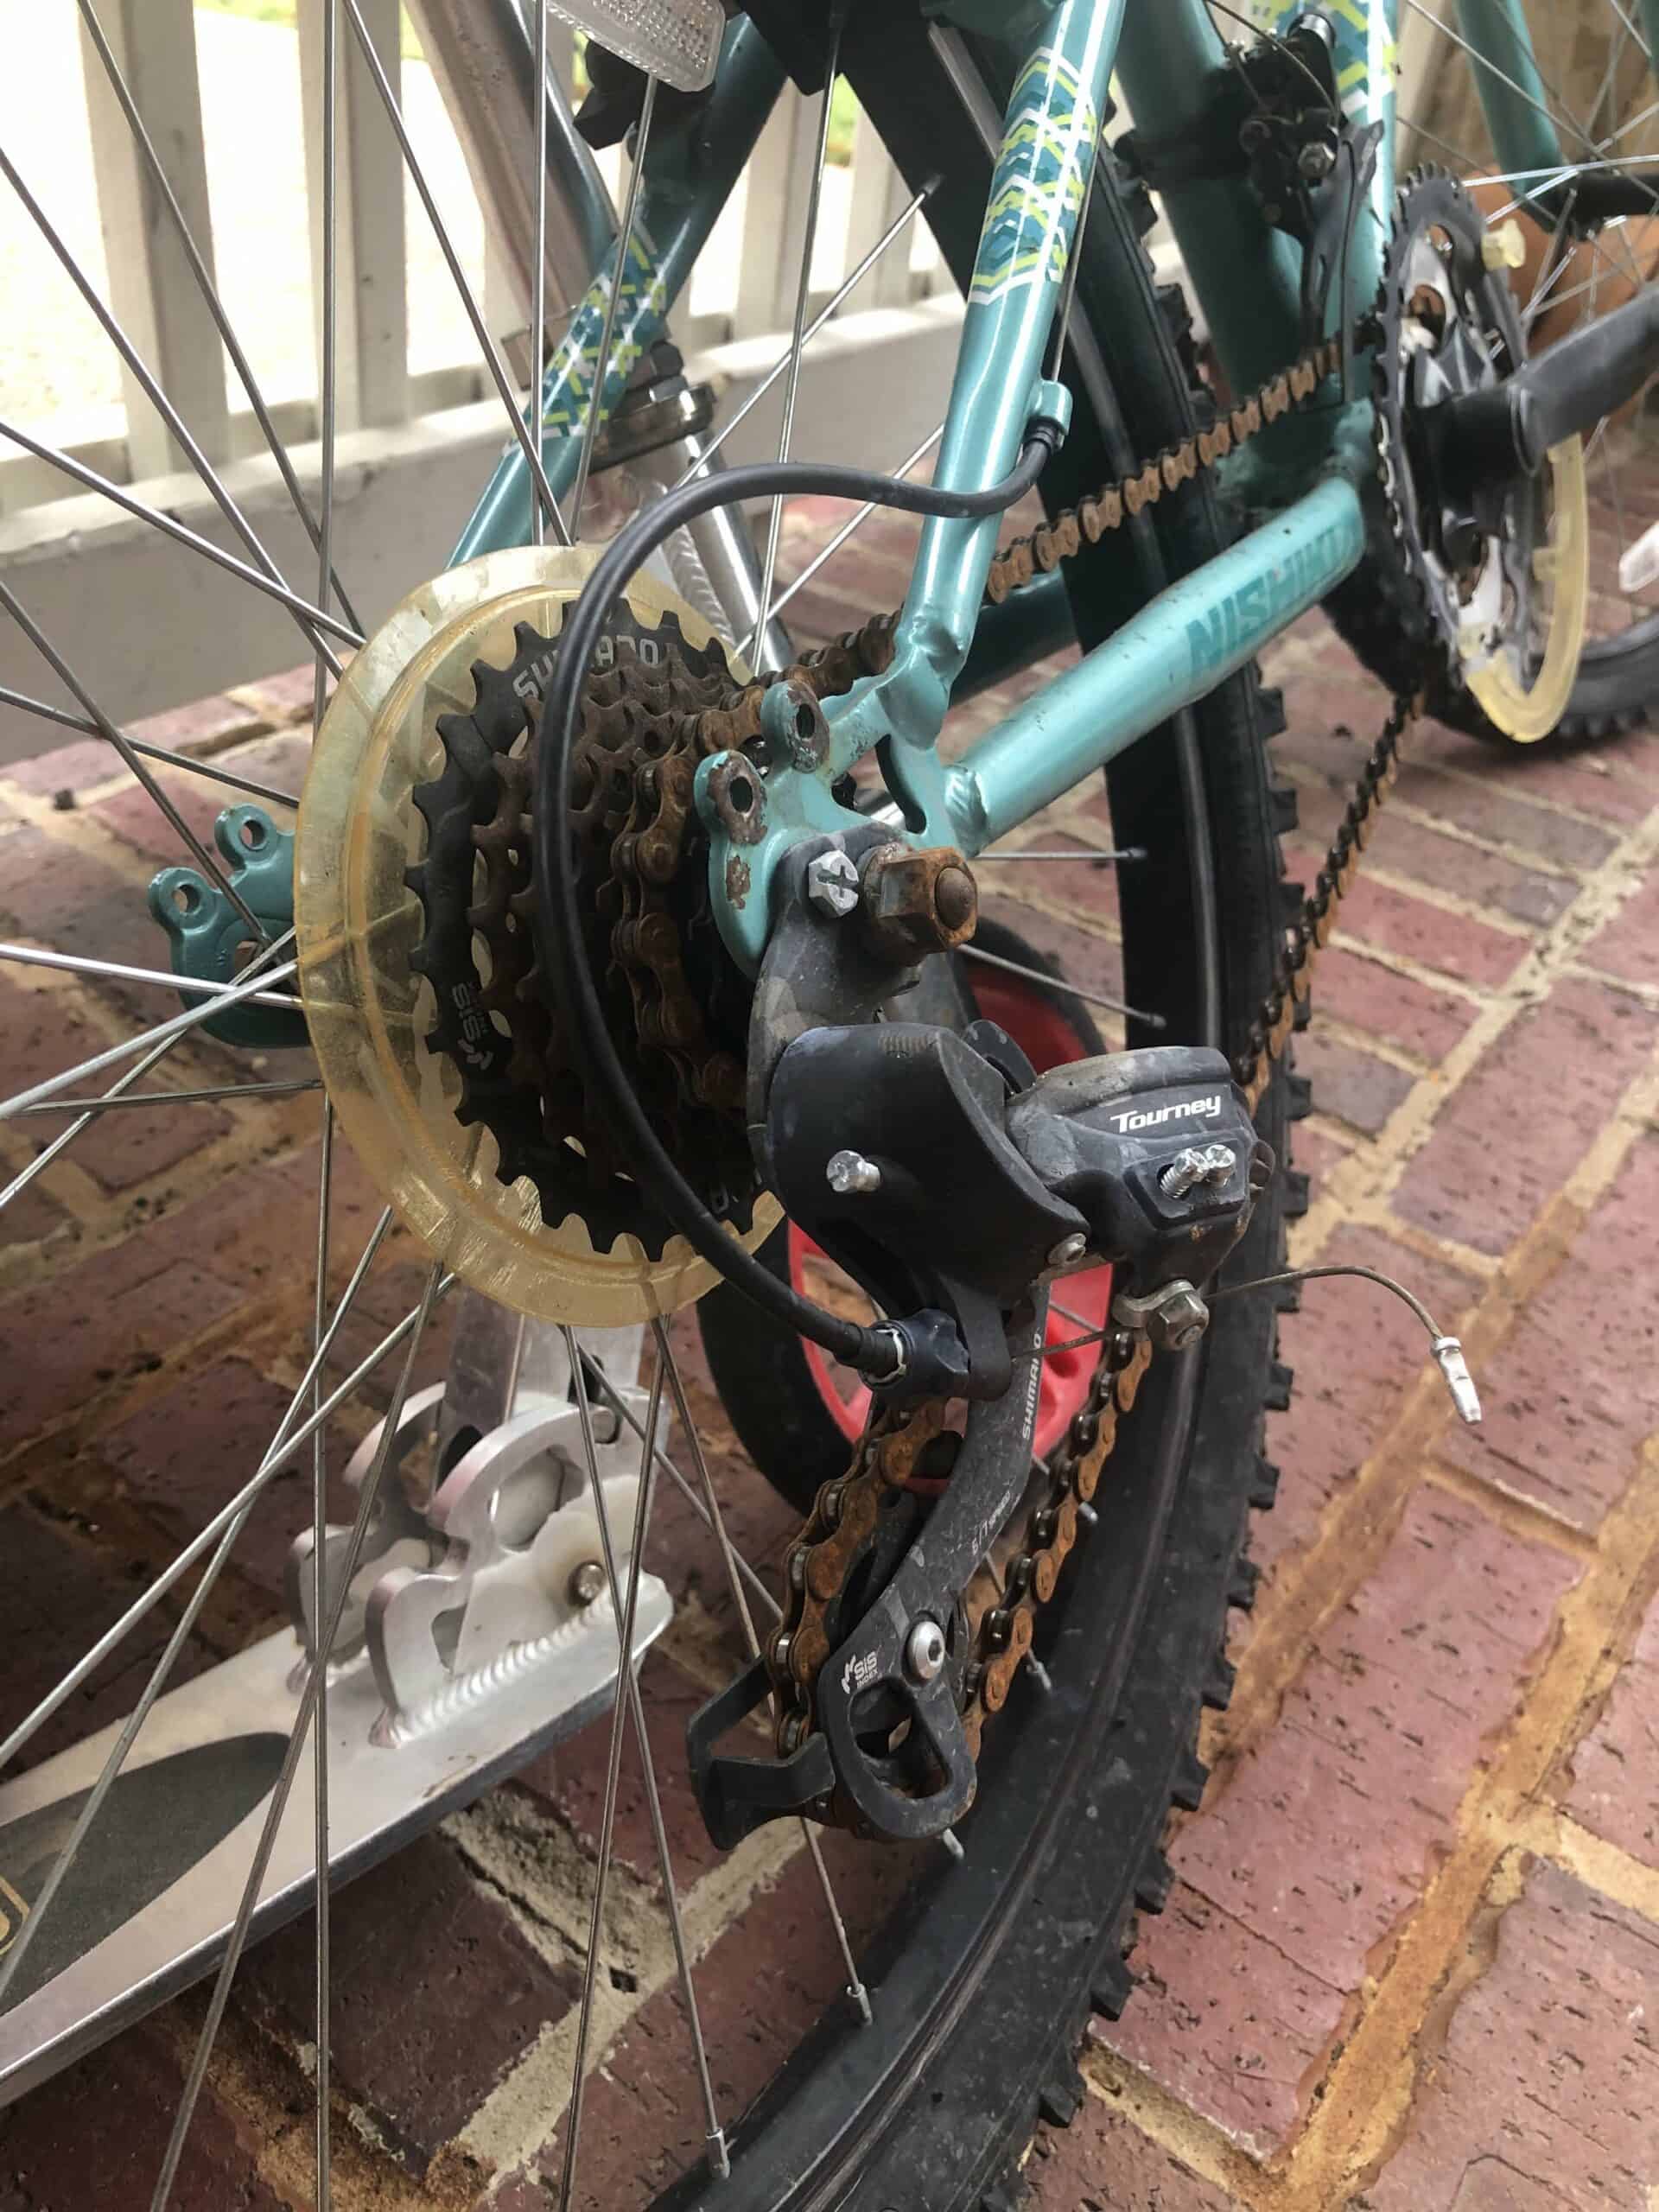 Bike Chain with Cassette and derailleur with a scooter in the background